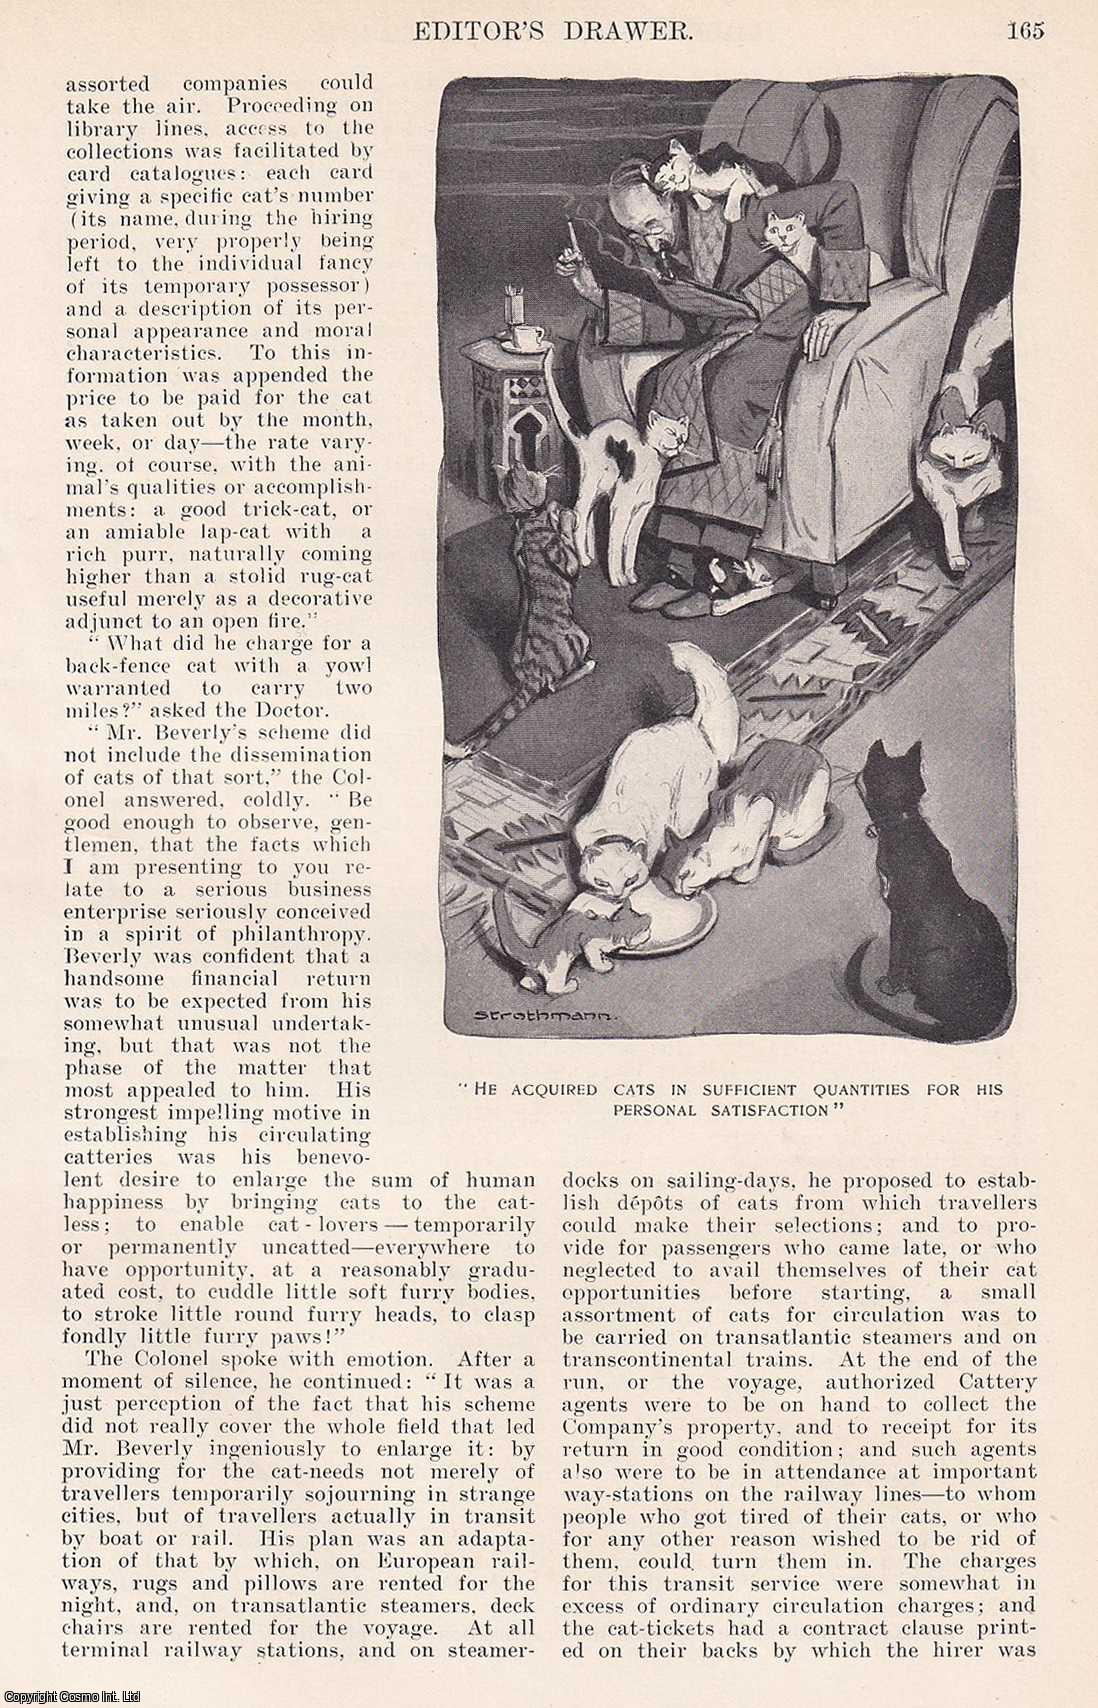 CAT HUMOUR - Beverly's Circulating Cattery; a repository for the storage and dissemination of cats. By Thomas A. Janvier. An original article from the Harper's Monthly Magazine, 1907.